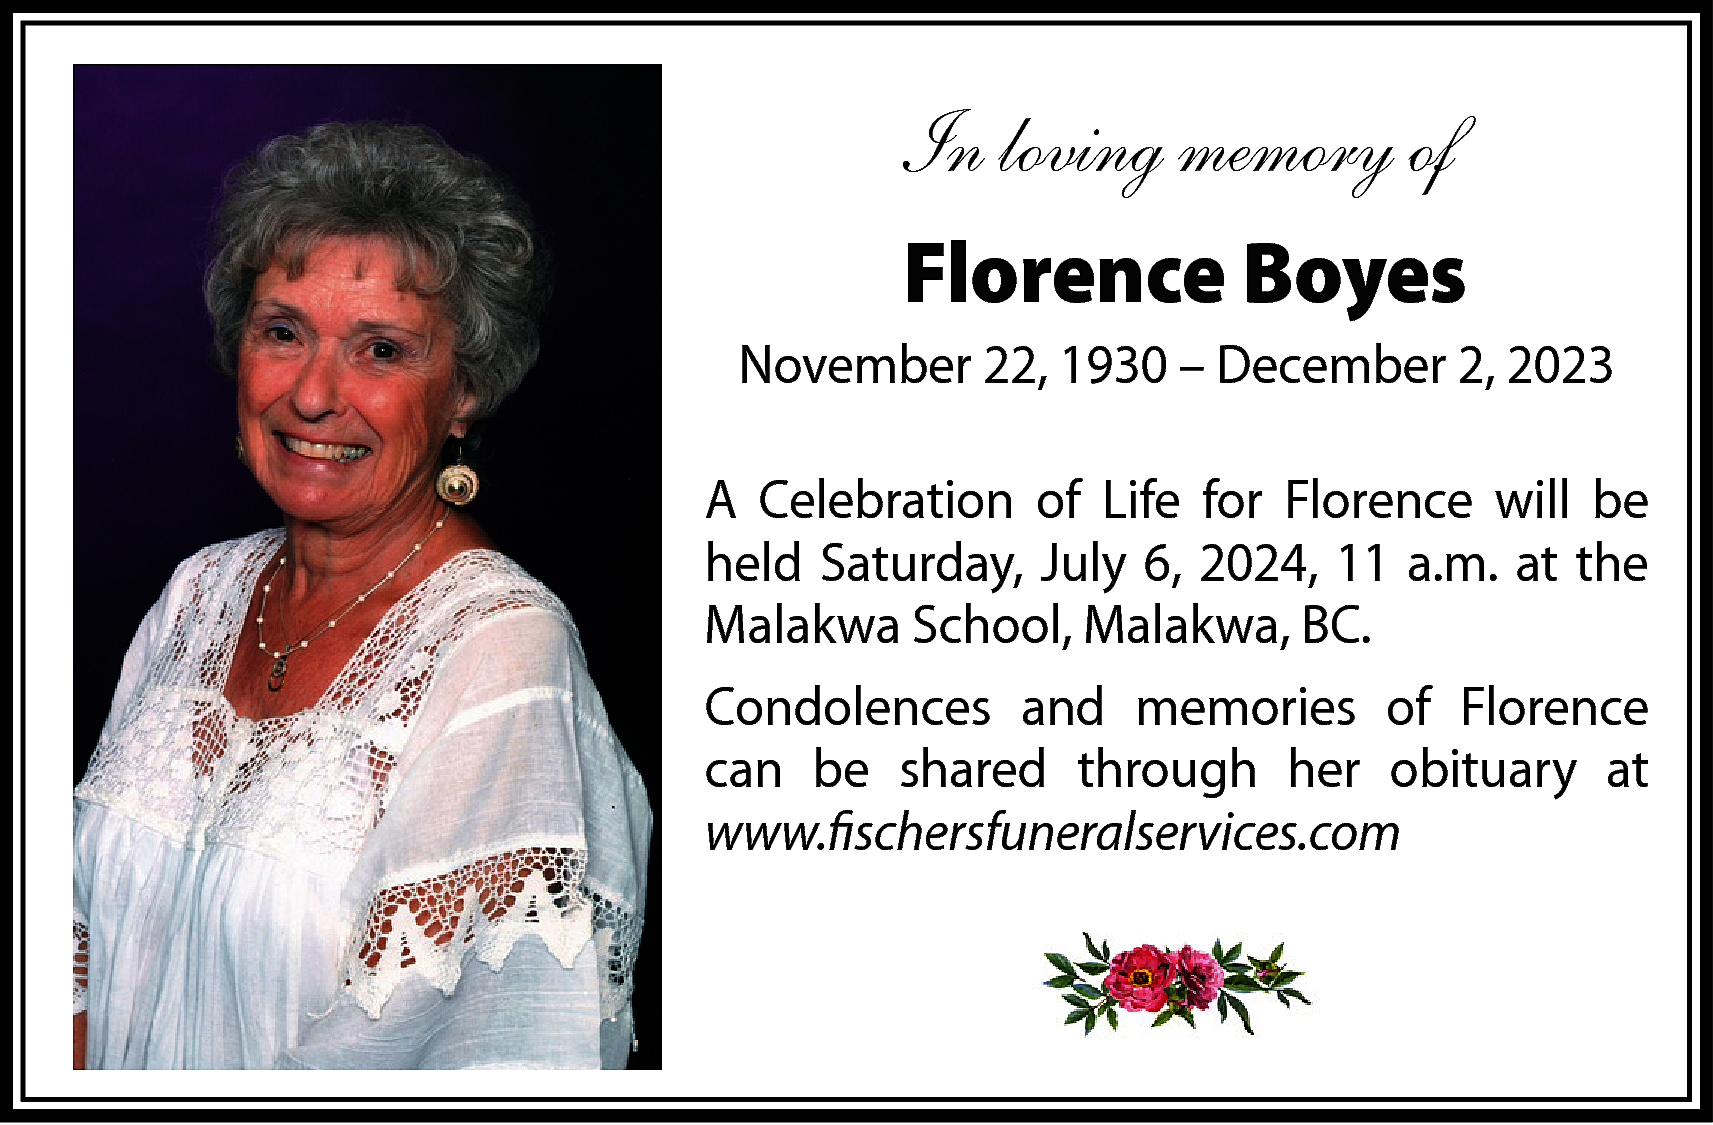 In loving memory of <br>Florence  In loving memory of  Florence Boyes  November 22, 1930 – December 2, 2023  A Celebration of Life for Florence will be  held Saturday, July 6, 2024, 11 a.m. at the  Malakwa School, Malakwa, BC.  Condolences and memories of Florence  can be shared through her obituary at  www.fischersfuneralservices.com    